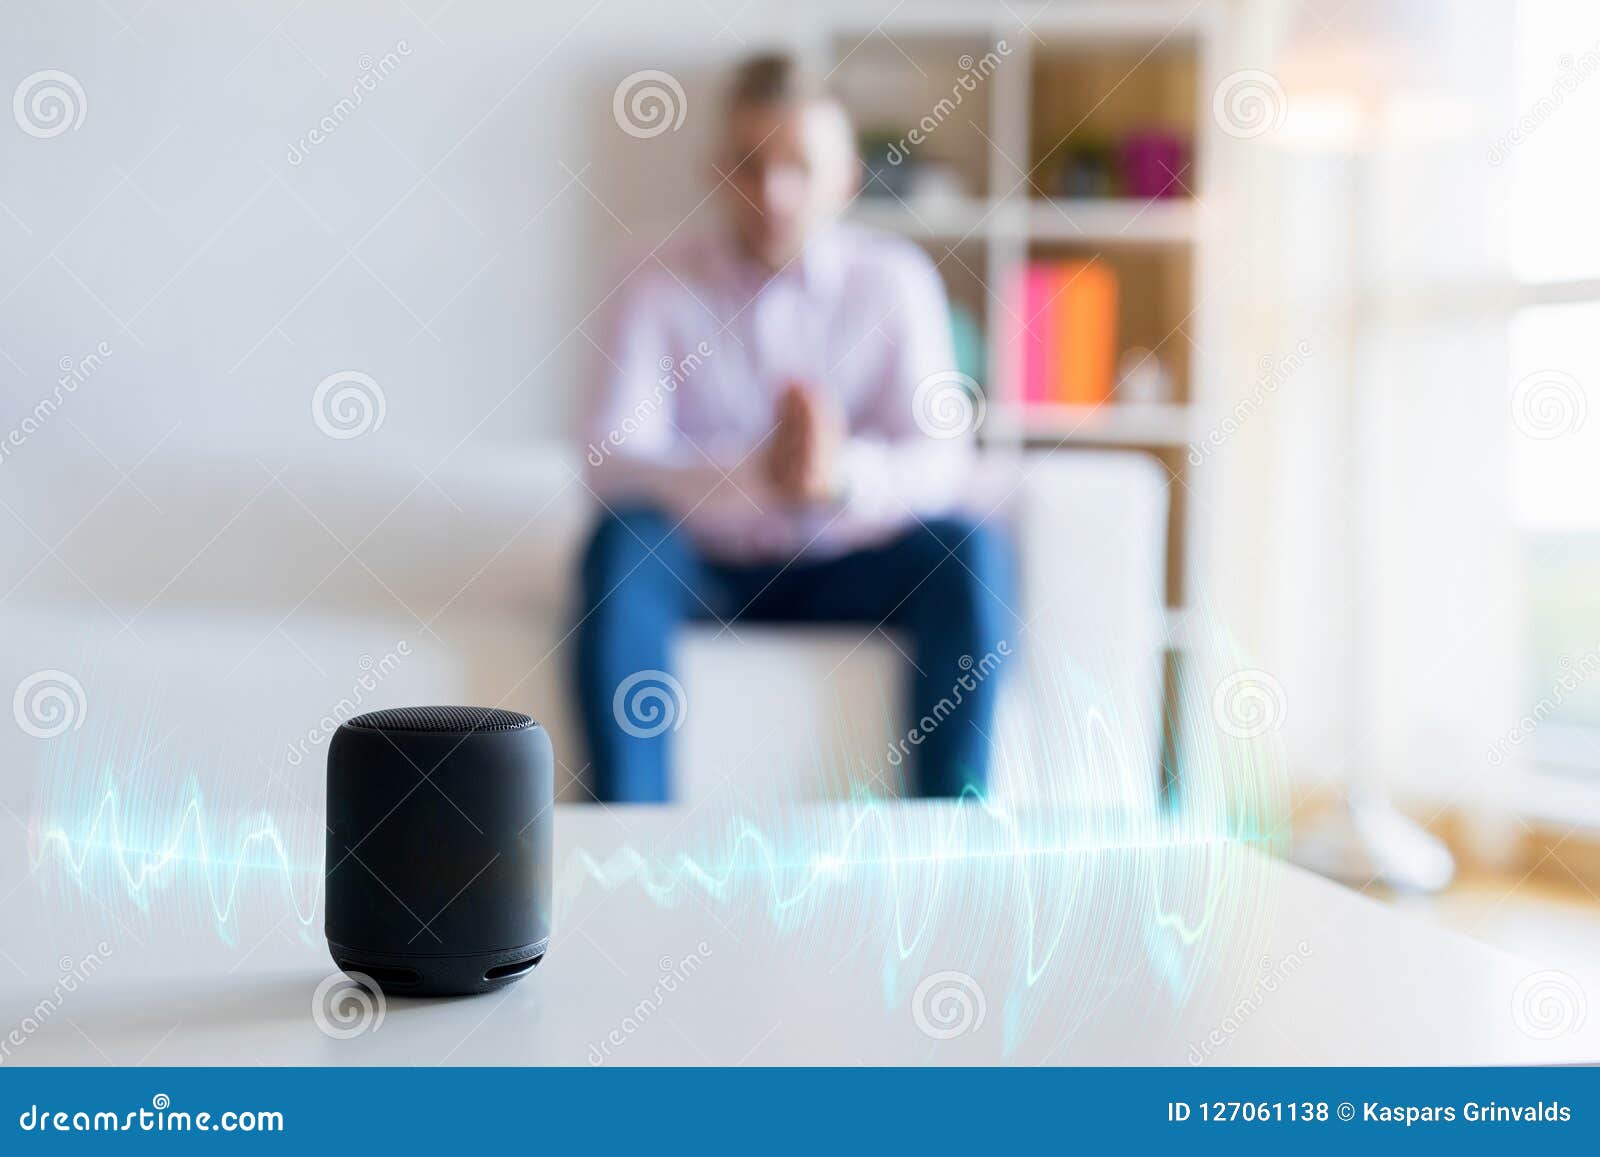 man using virtual assistant, smart speaker at home